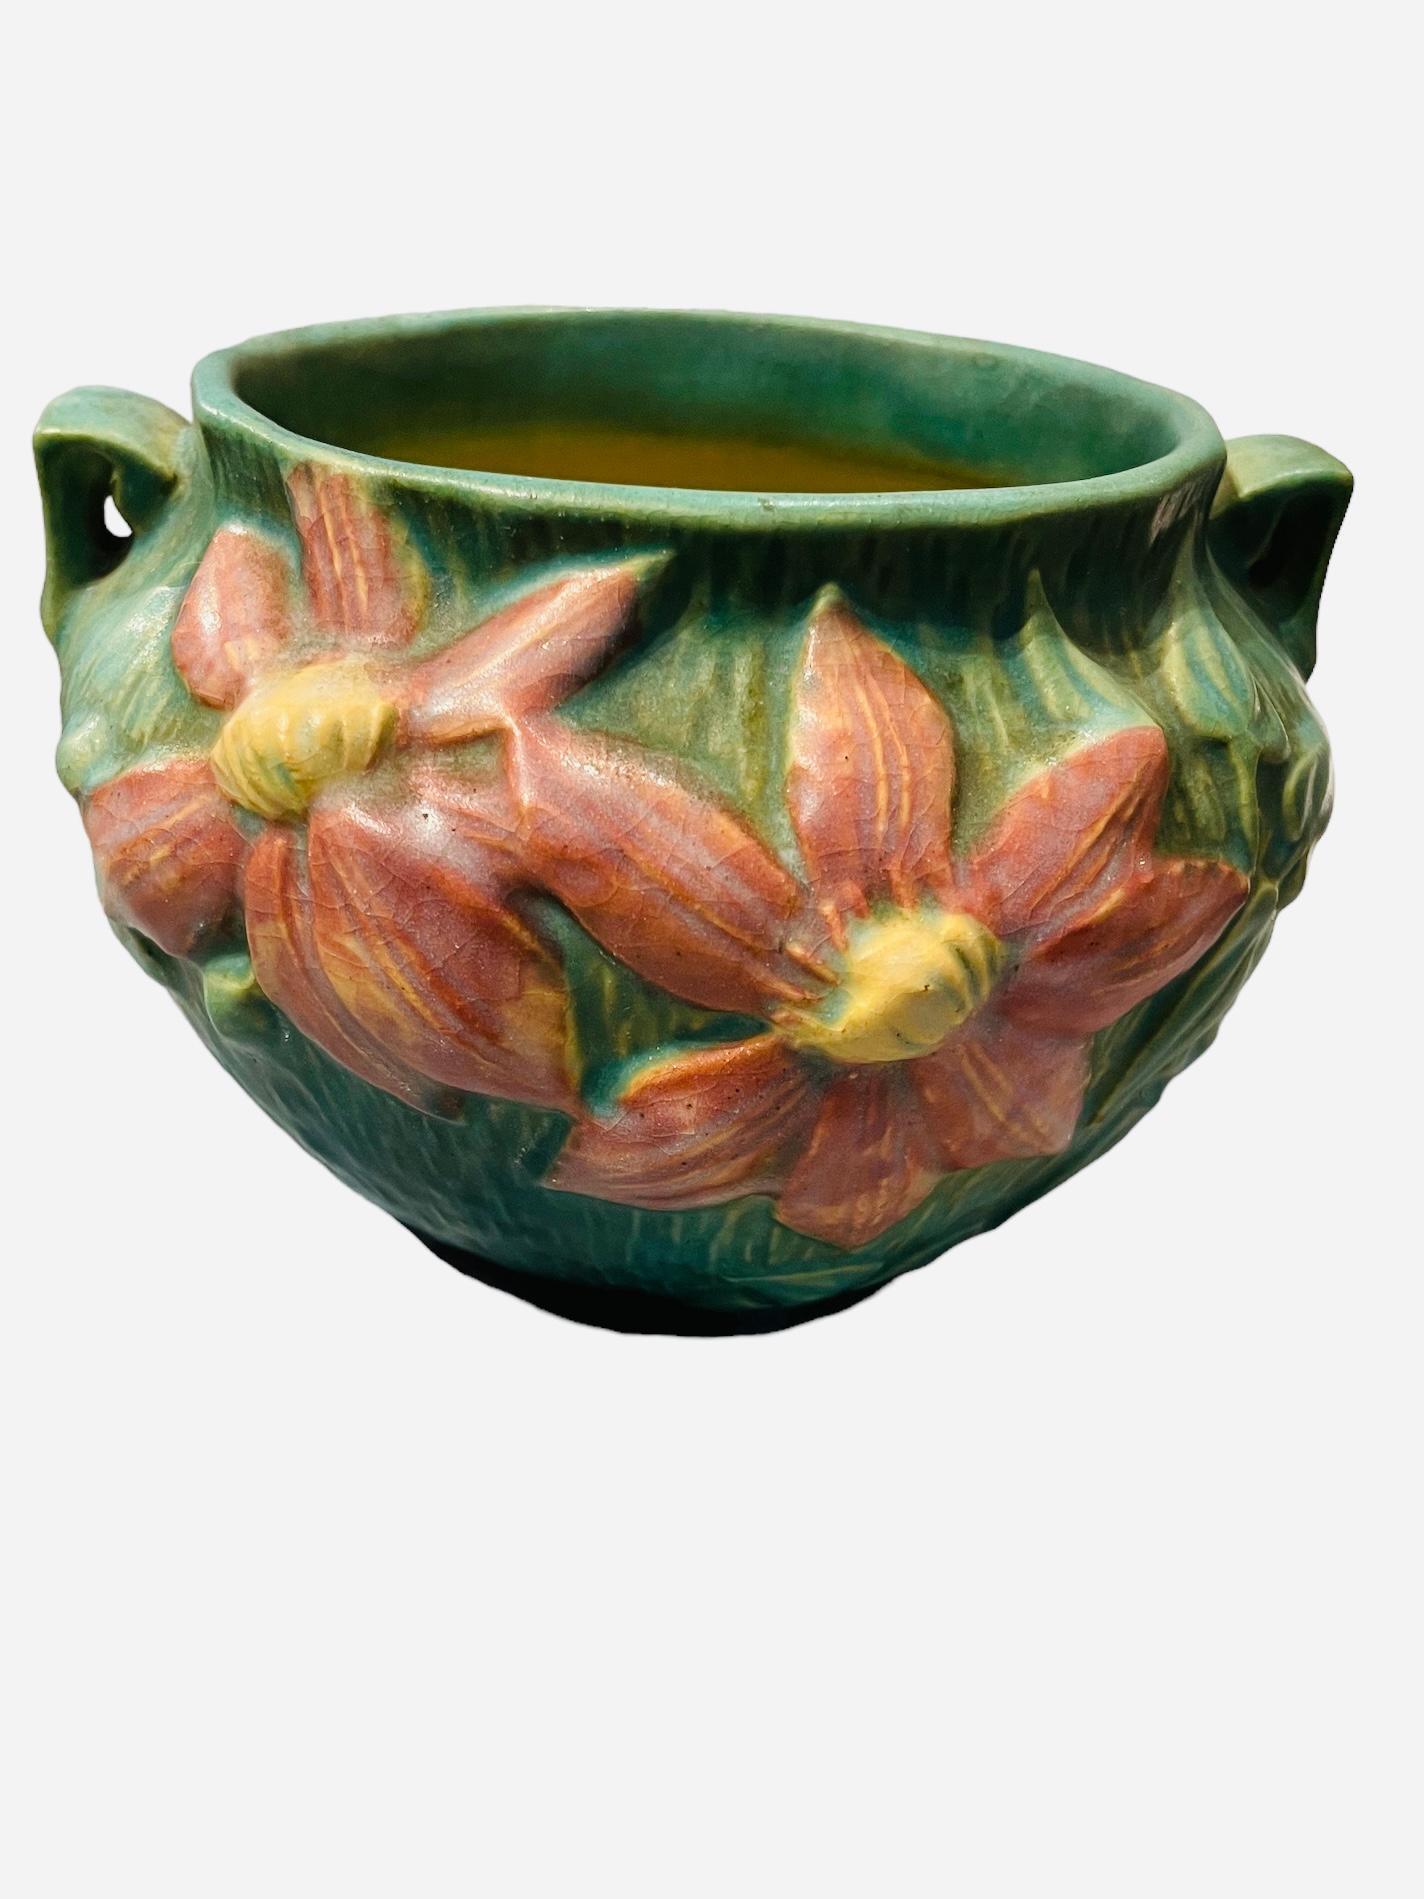 This is a Roseville Art Pottery Clematis flowers pattern bowl. The bowl is green and adorned with Clematis brown flowers with yellow center and green leaves in the front and back. Small triangular shaped handles are at each side of the body. Below